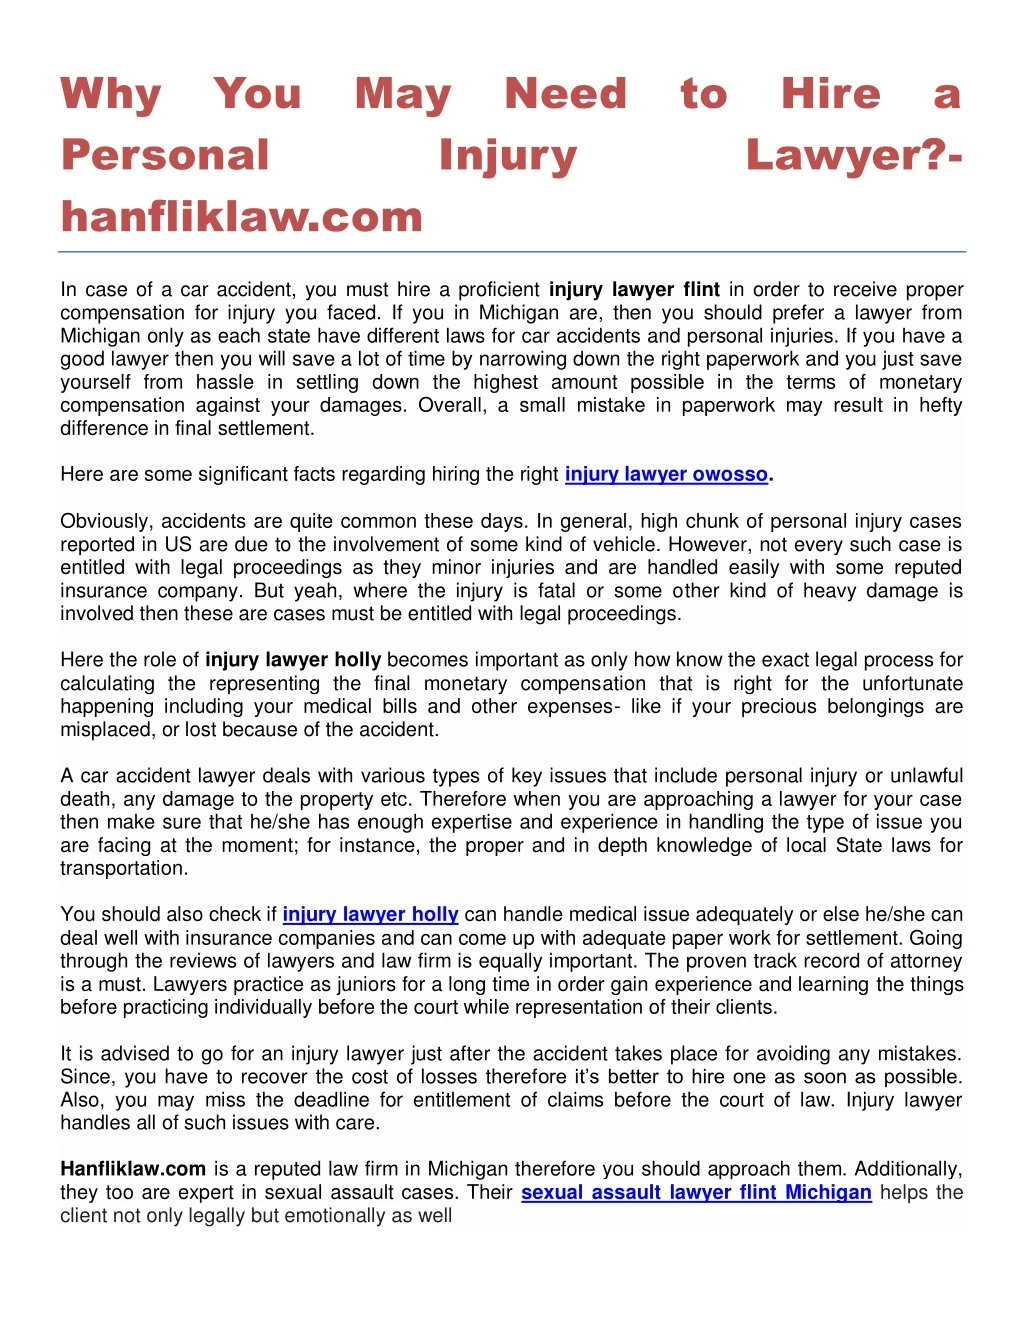 why you may need to hire a personal injury